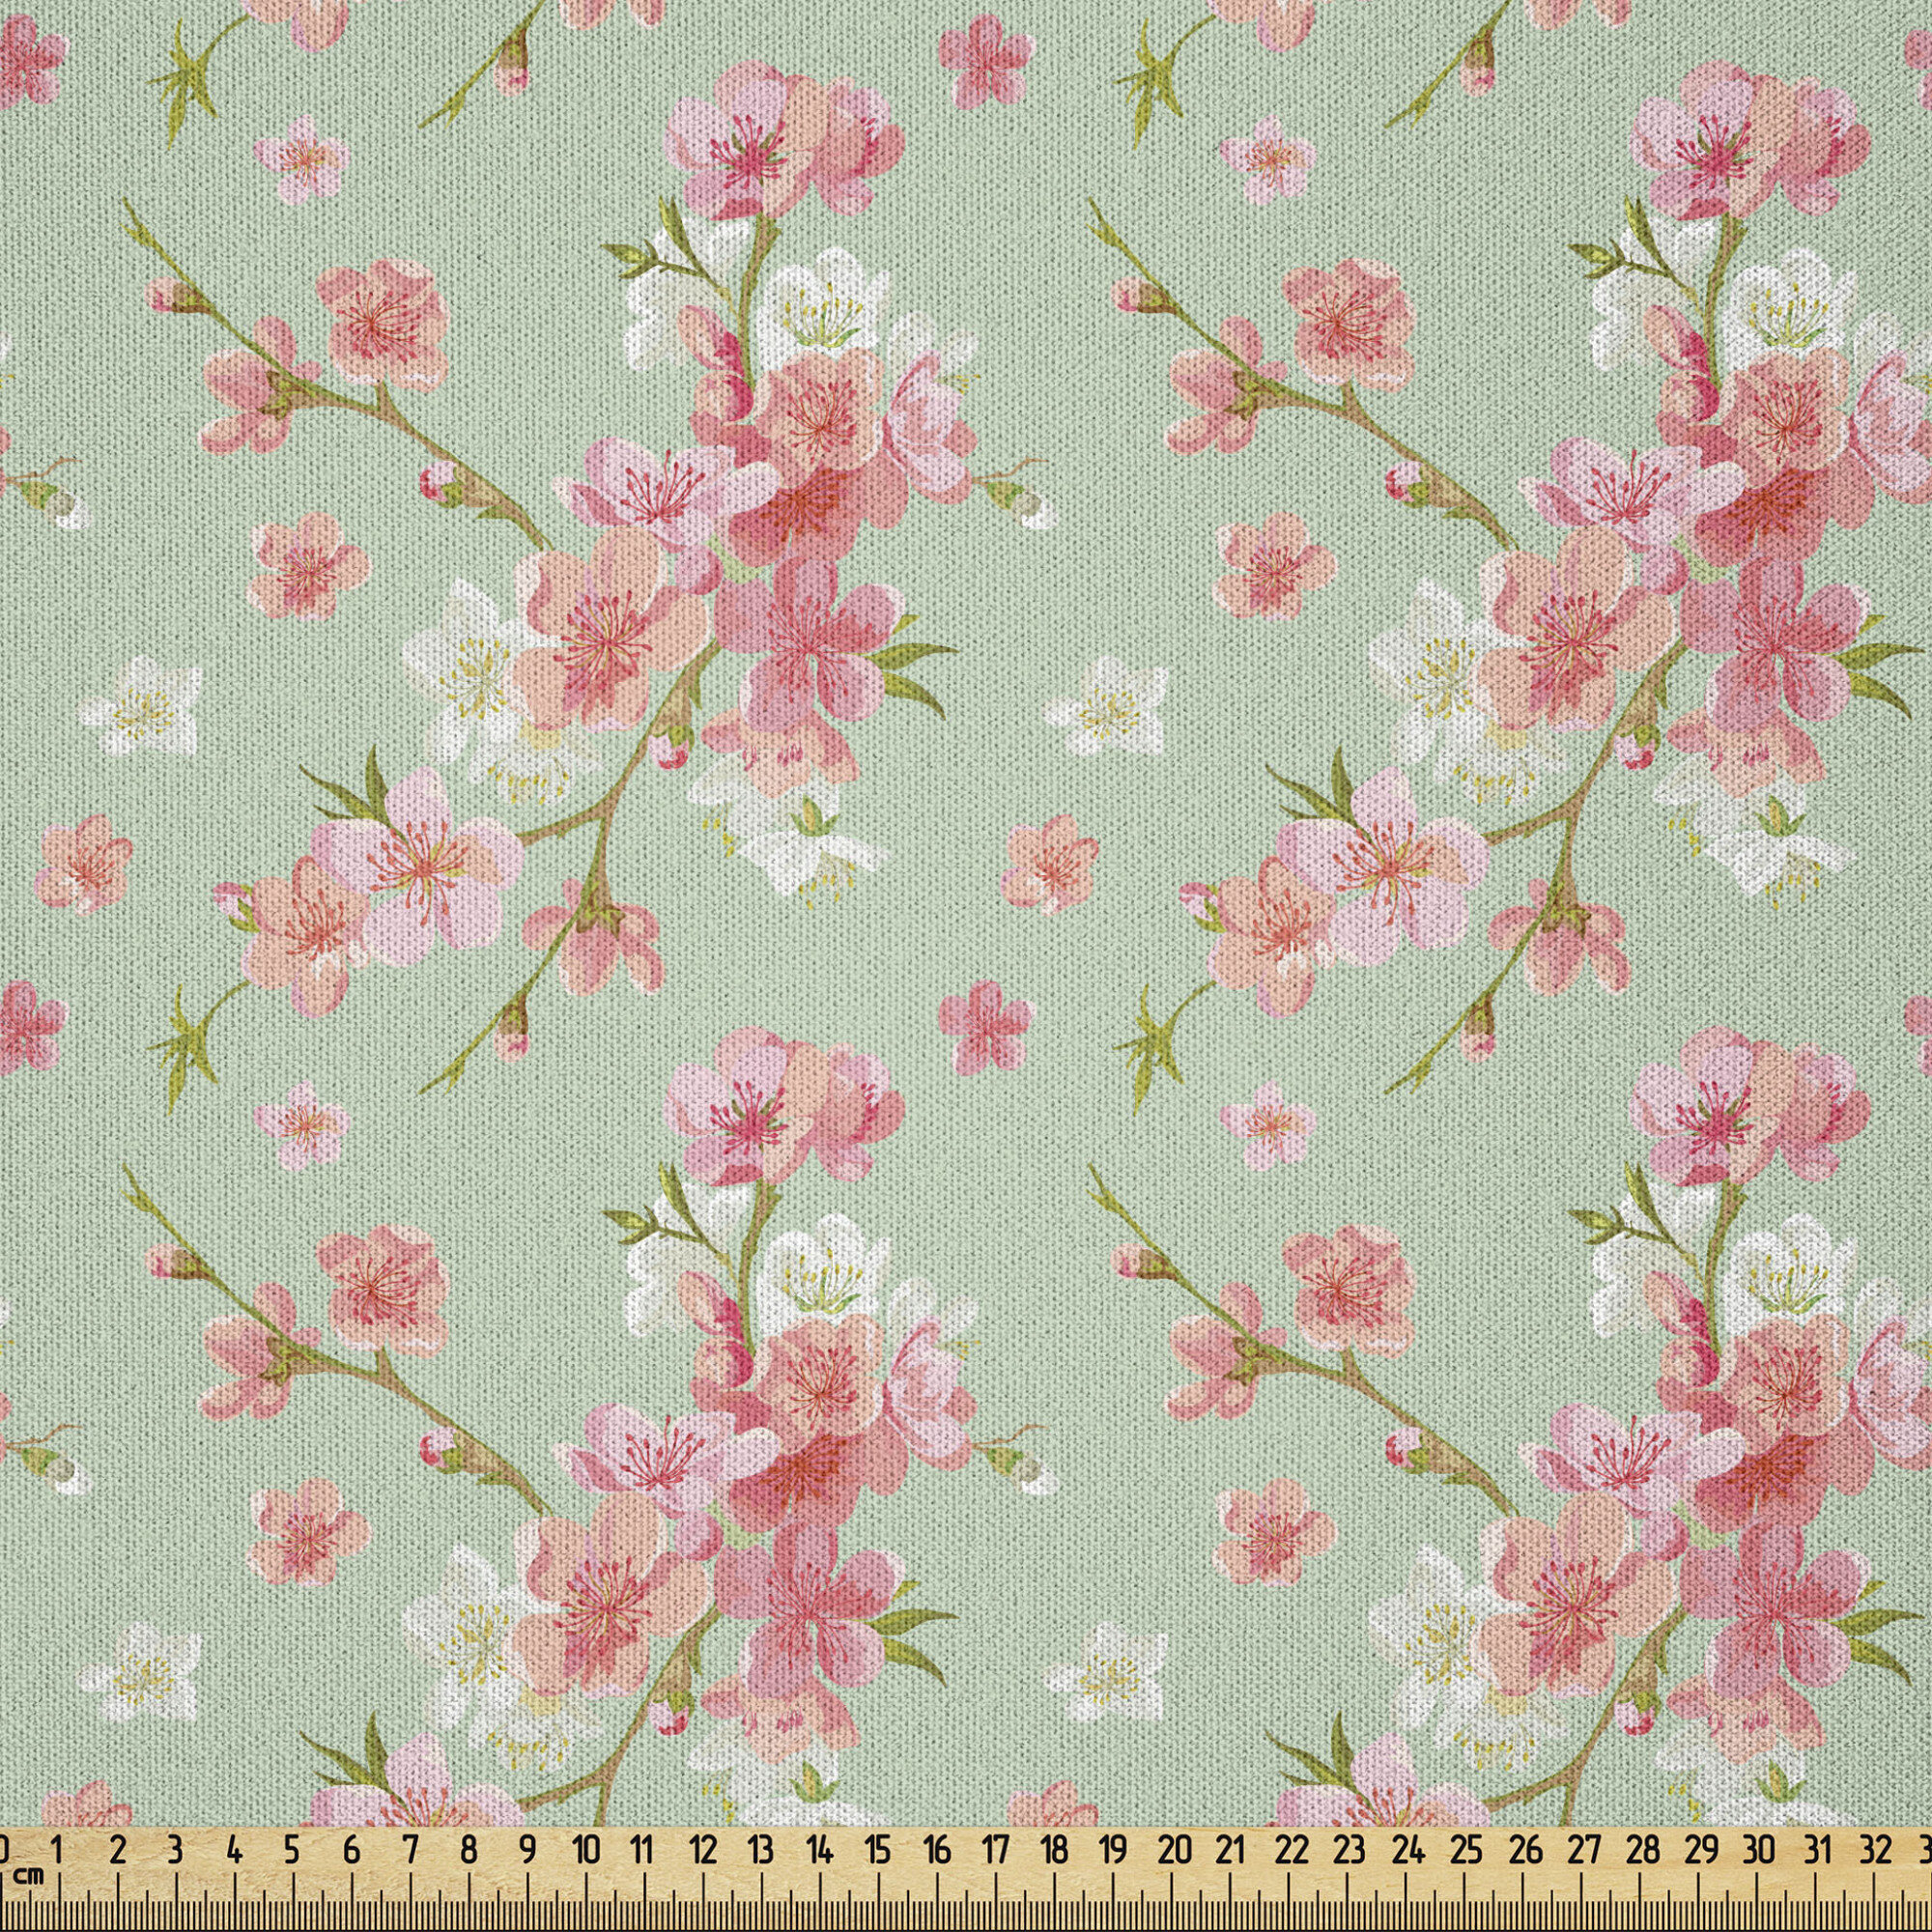 Pattern of Blossoming Romantic Flowers with Leaves Vintage Garden Art Dining Room Kitchen Rectangular Runner Eggshell Pink and Green Ambesonne Floral Table Runner 16 X 72 